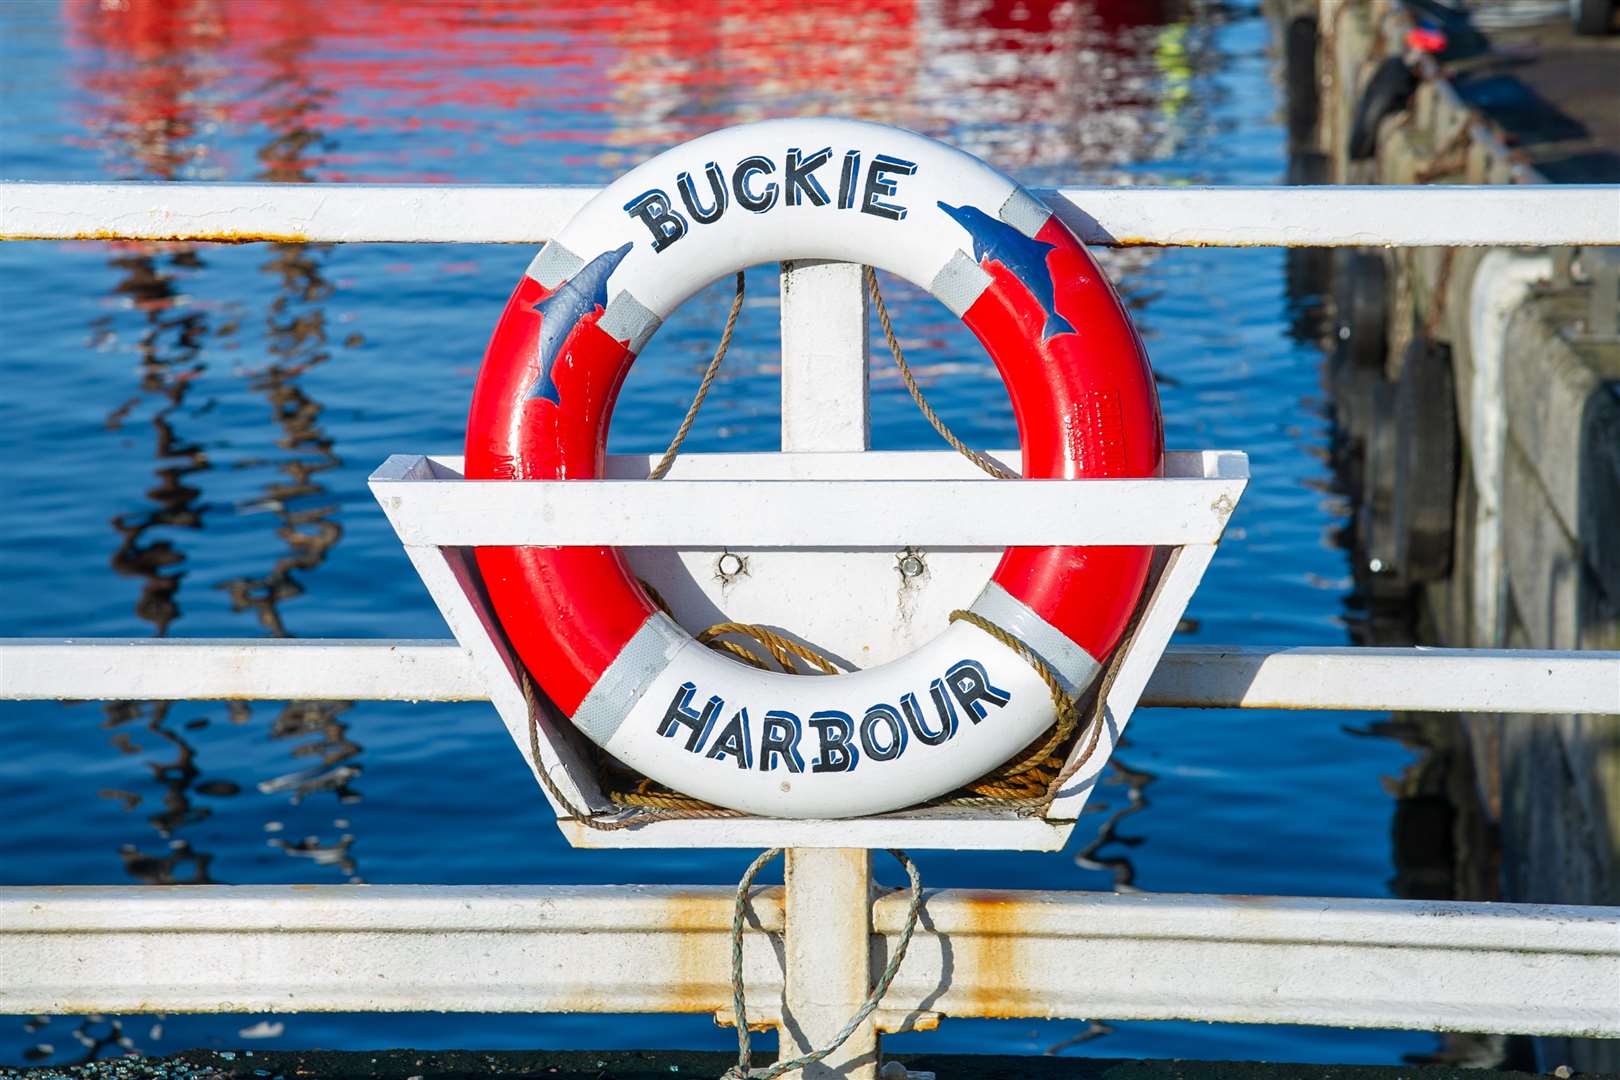 It was a very quiet week of landings at Buckie Harbour. Picture: Daniel Forsyth